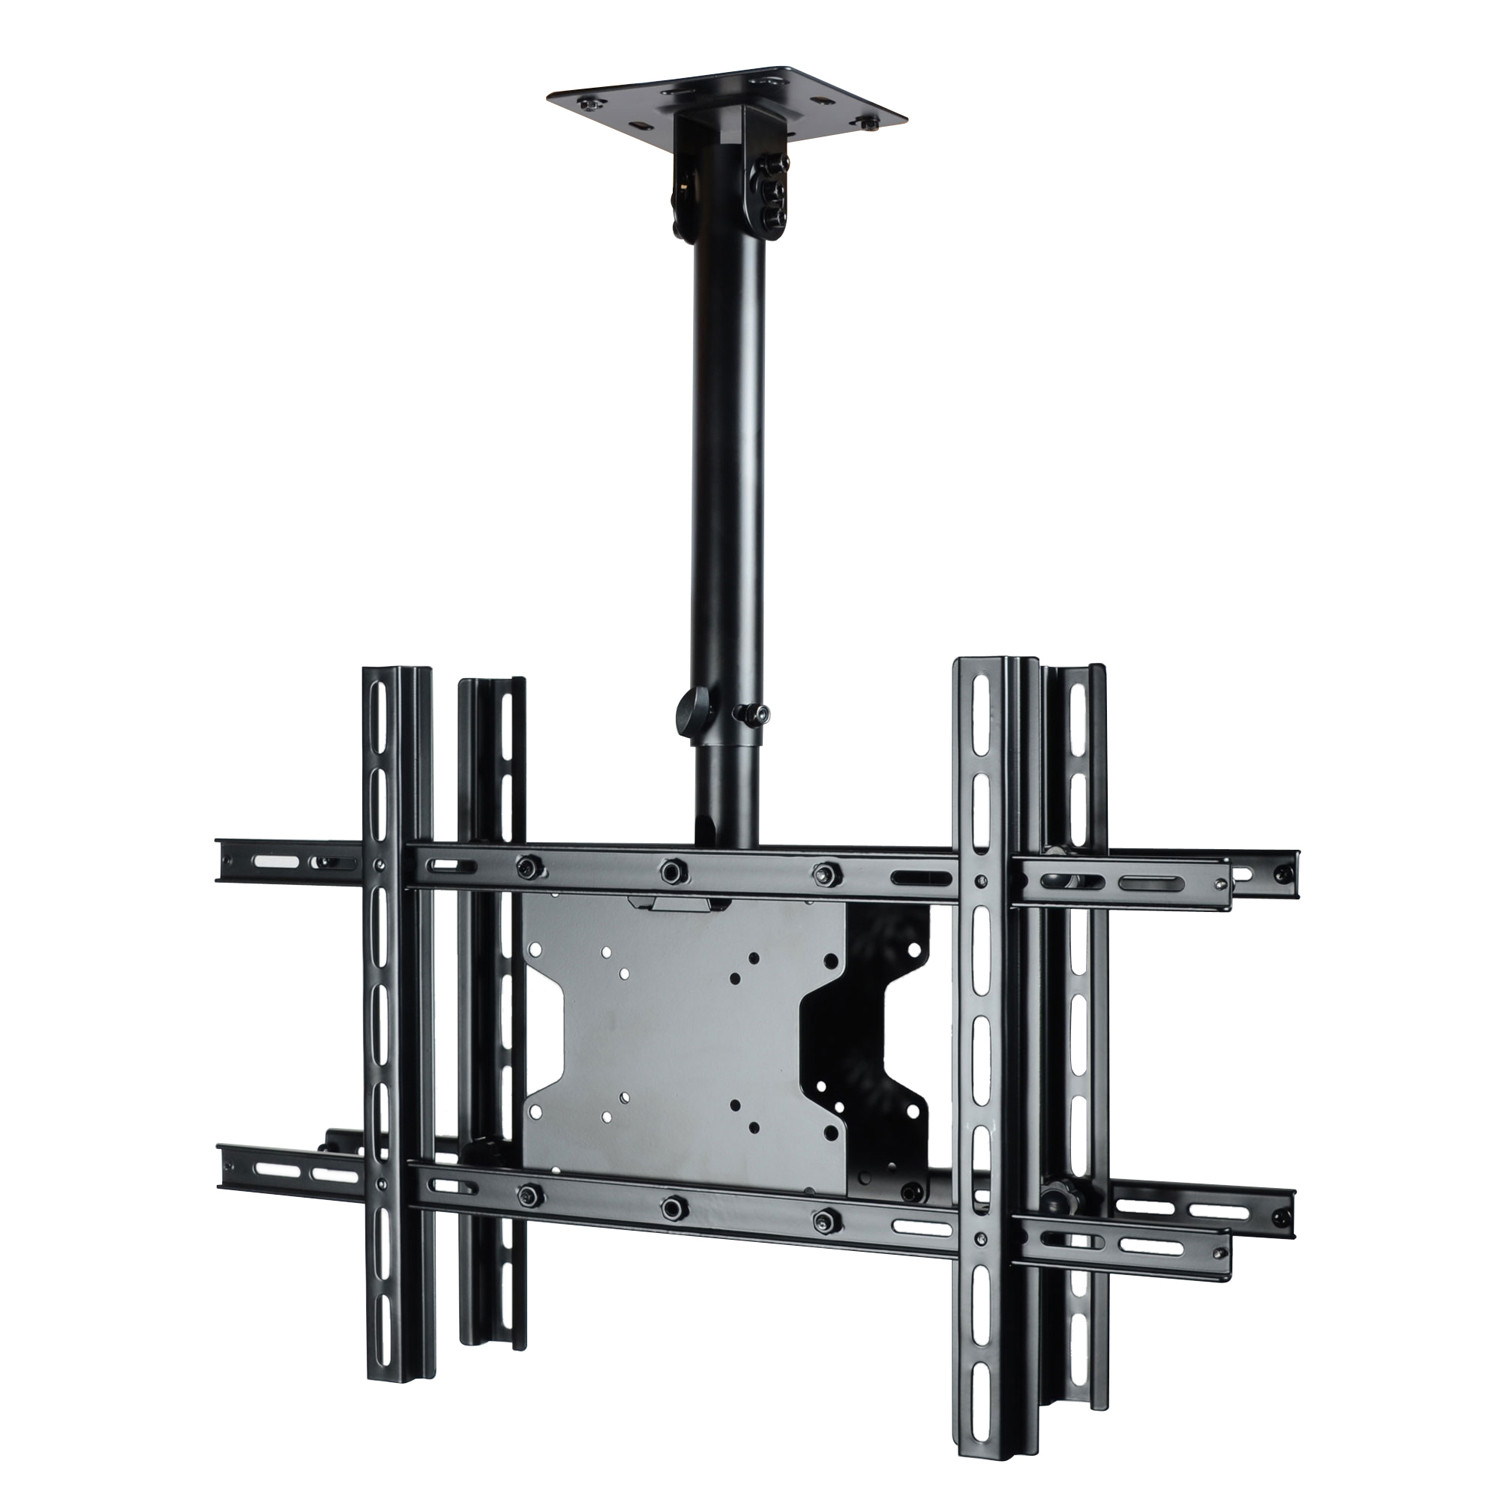 VideoSecu Adjustable Tilt Swivel Dual TV Ceiling Mount for 32"-70" LED LCD Plasma OLED HDTV Flat Panel Screen, 70" with mounting hole patterns 600x400/400x400/400x200/300x300/200x200/200x100mm BXB - image 1 of 6